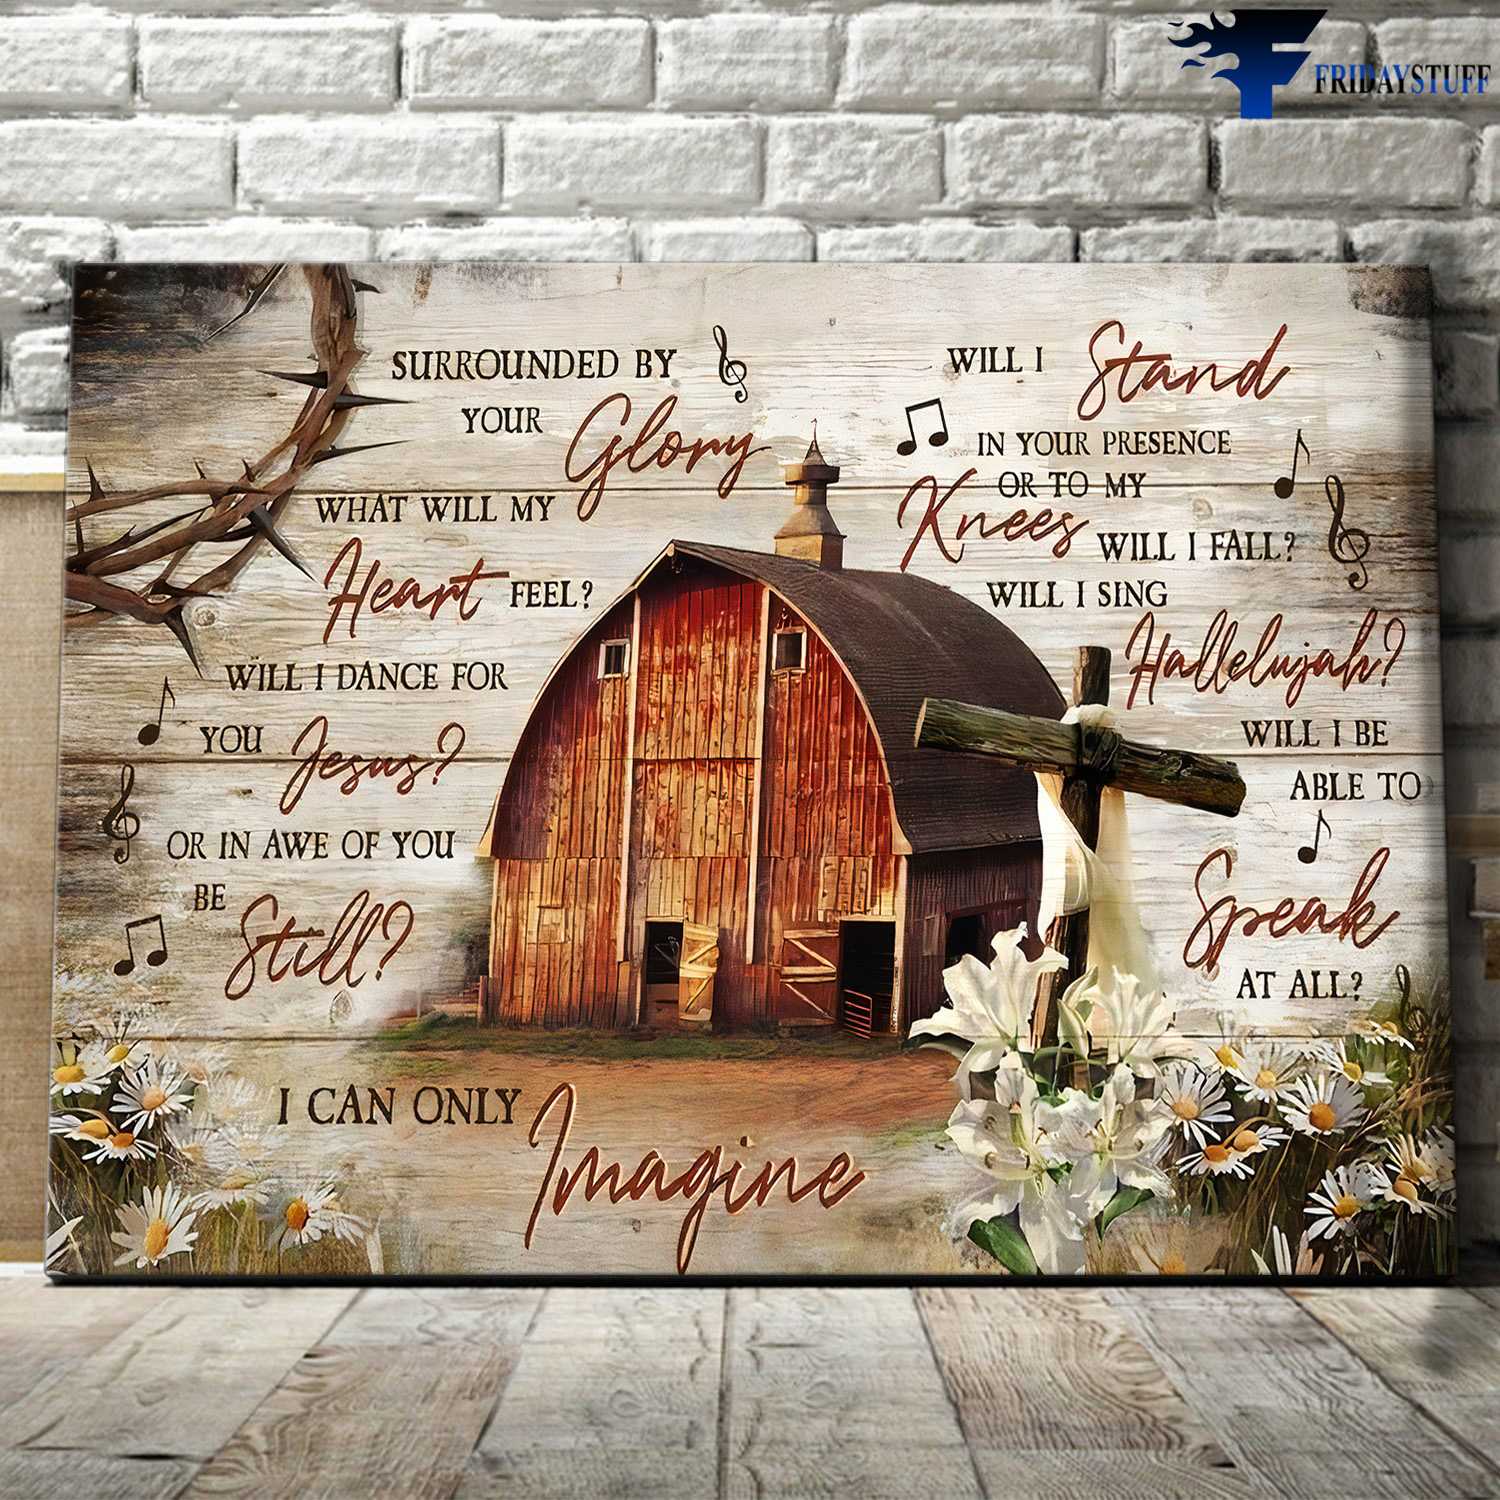 Farmer Poster, God Lover - I Can Only Imagine, Surrounded By Your Glory, What Will My Heart Feel, Will I Dance For You Jesus, Or In Awe Of You Be Still, Will I Stand In Your Presence